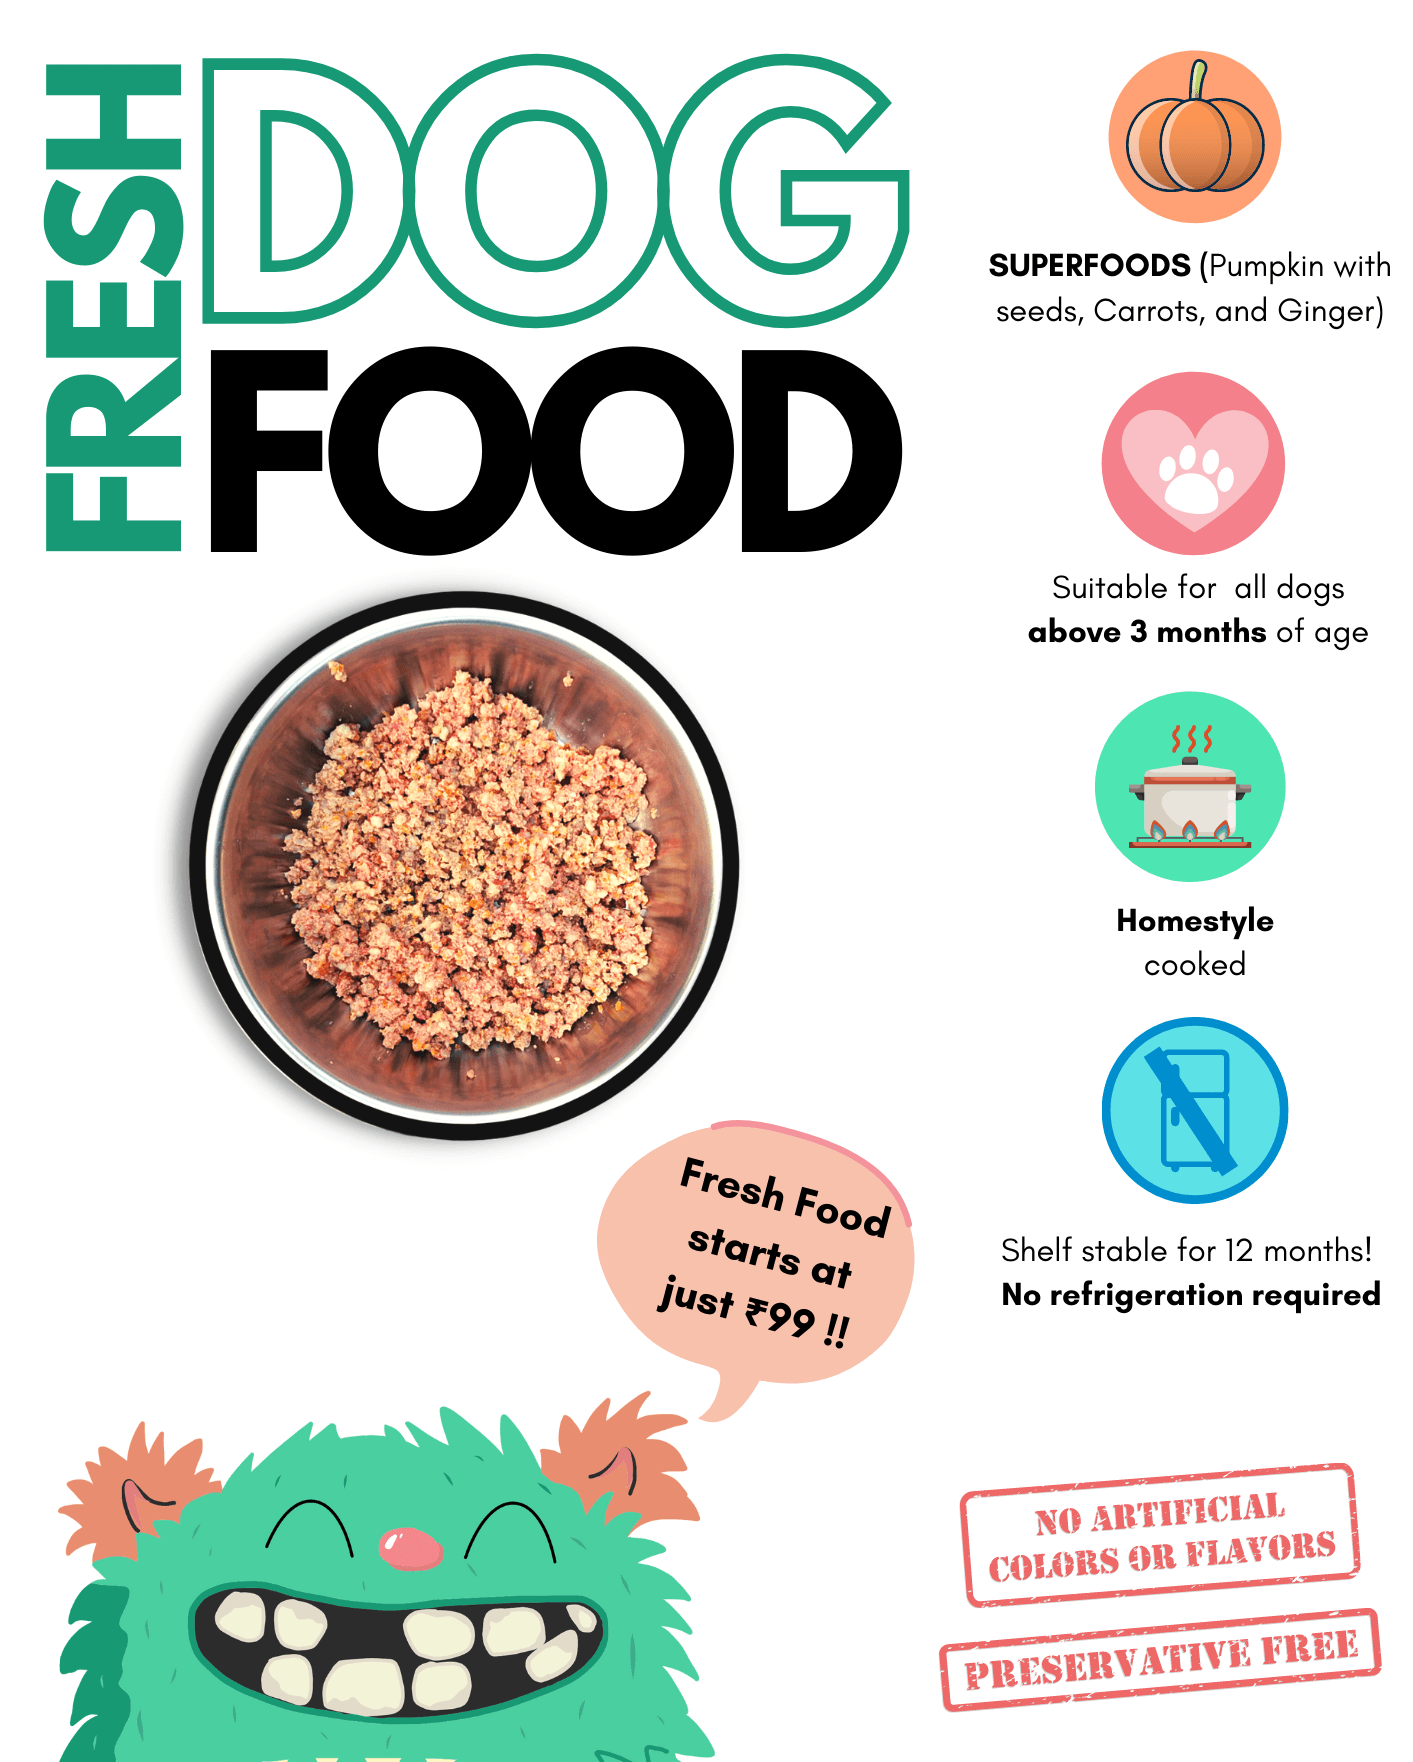 Doggos Mini Jumbo Monster + 3 Instant Broth Free (30 packets of 150g of fresh dog food + 3 Chicken Broth Free) - Wagr Petcare